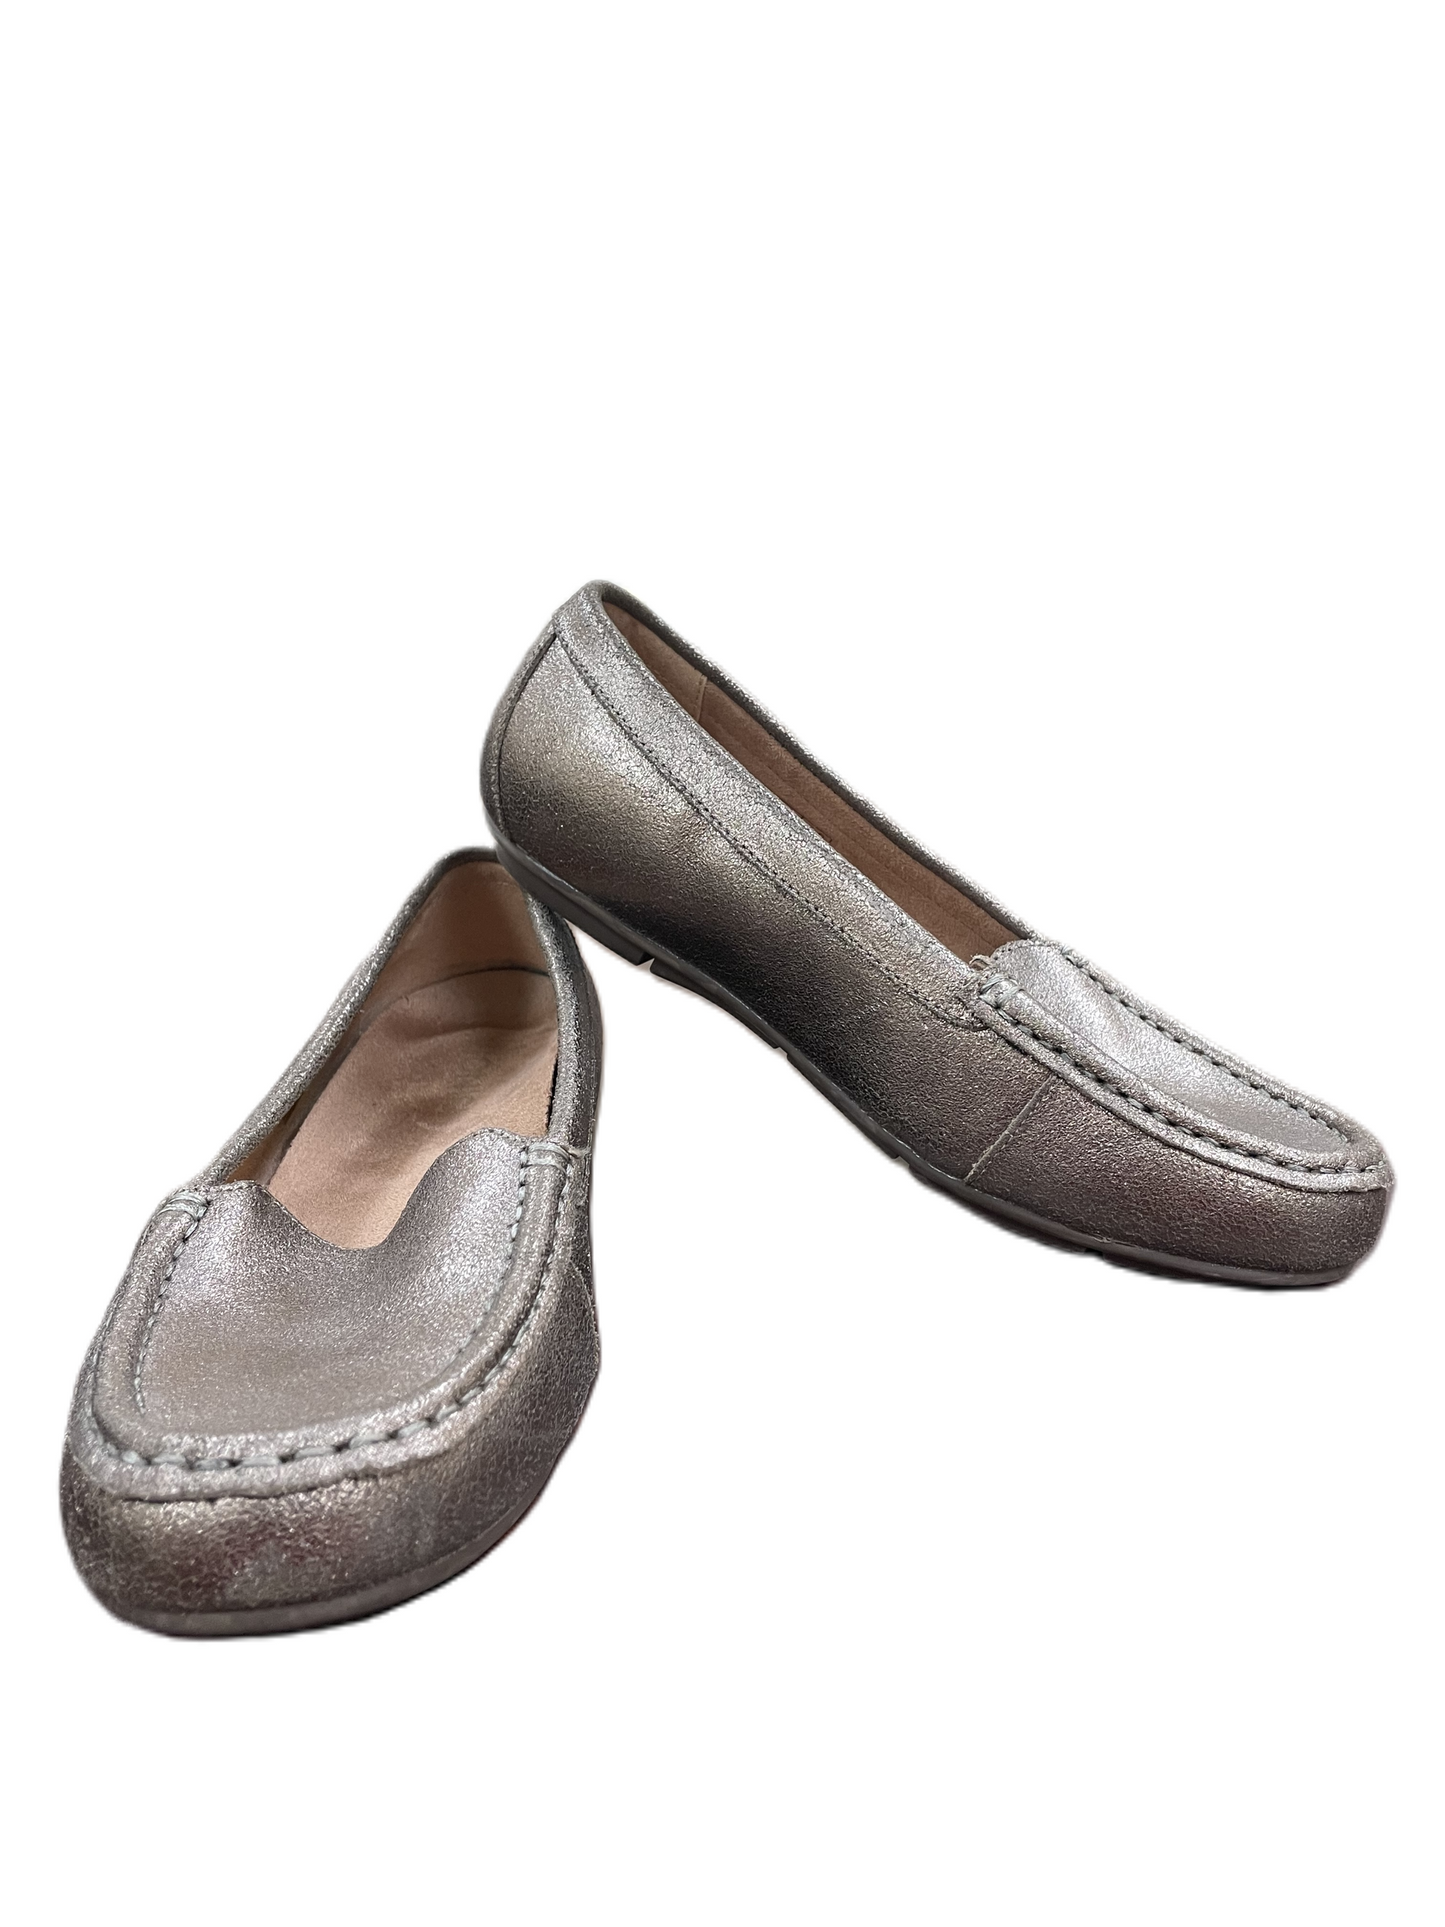 Shoes Flats Loafer Oxford By Vionic  Size: 7.5